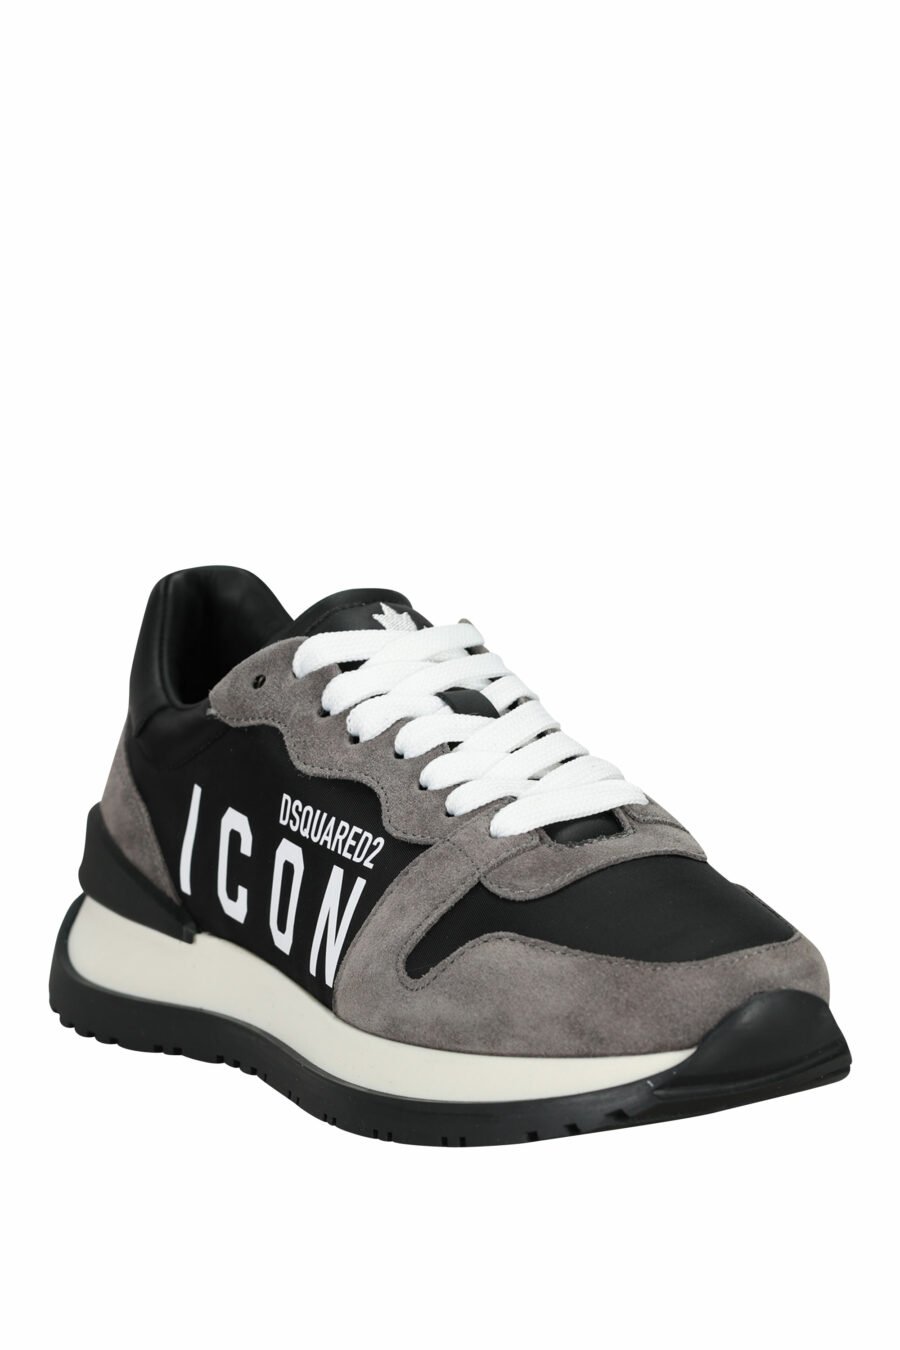 Black trainers with brown mix and mini logo "icon" - 8055777303825 1